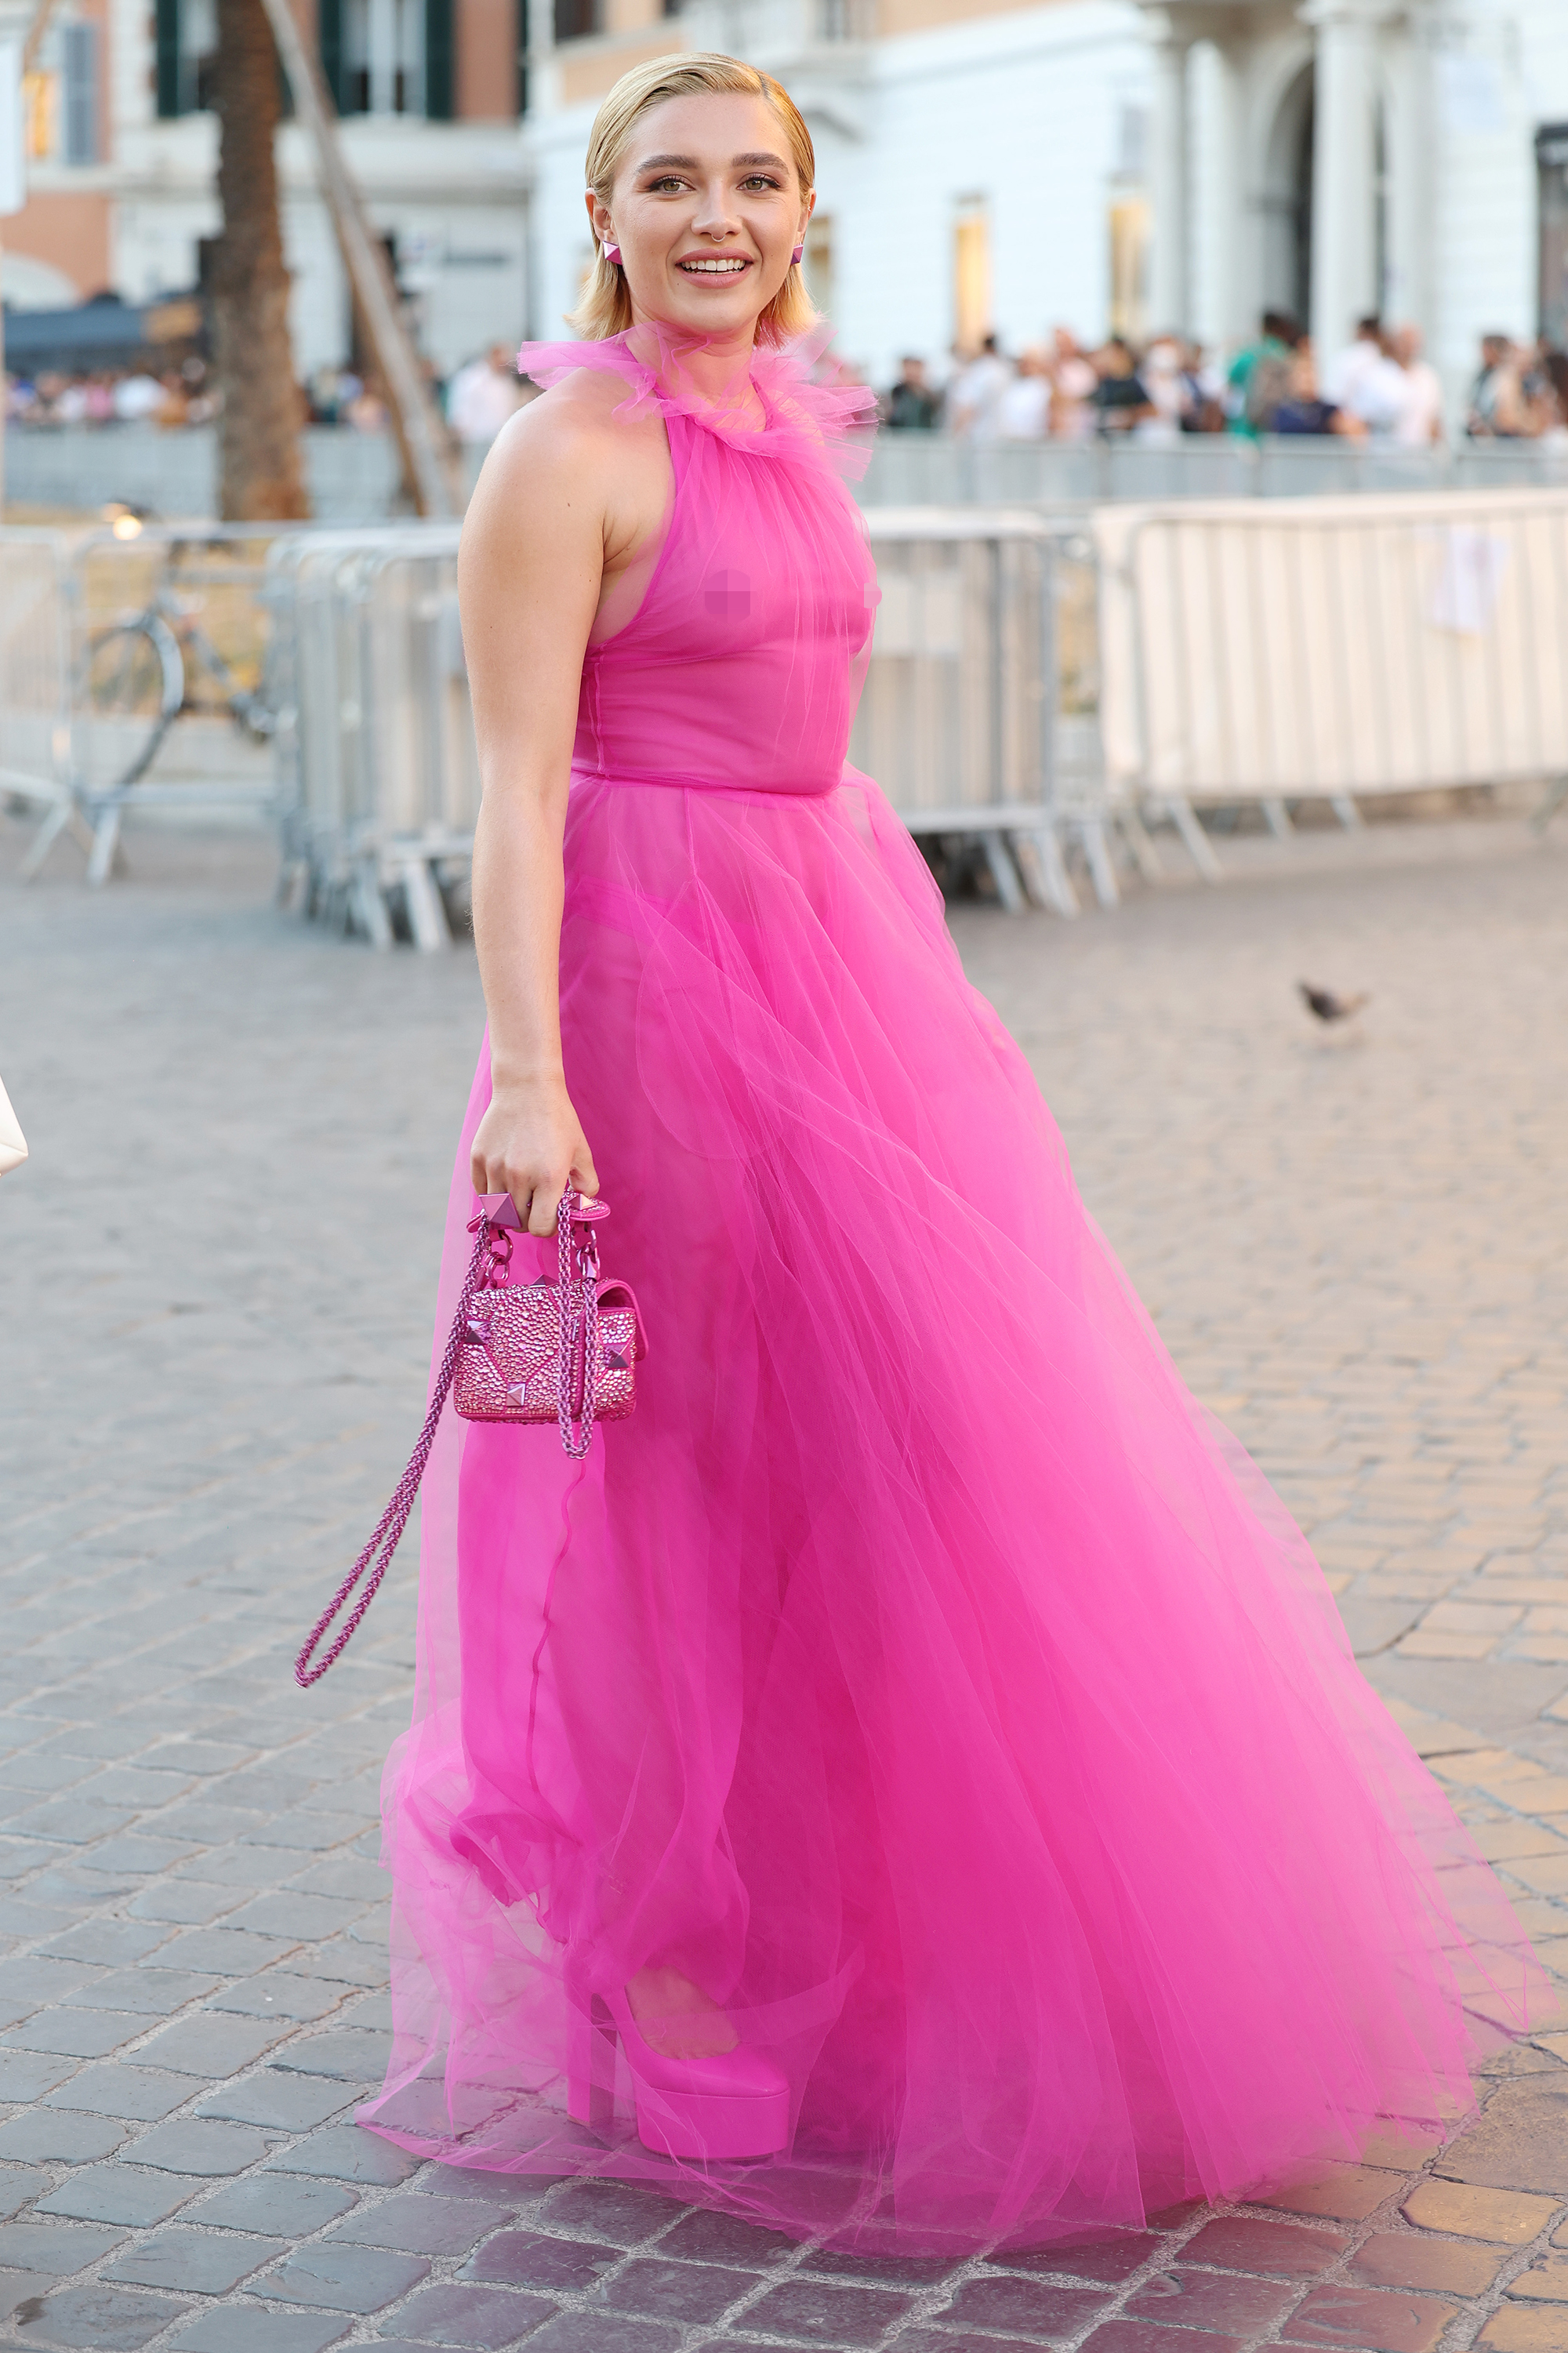 Florence Pugh sparked discussion with her pink Valentino look in July